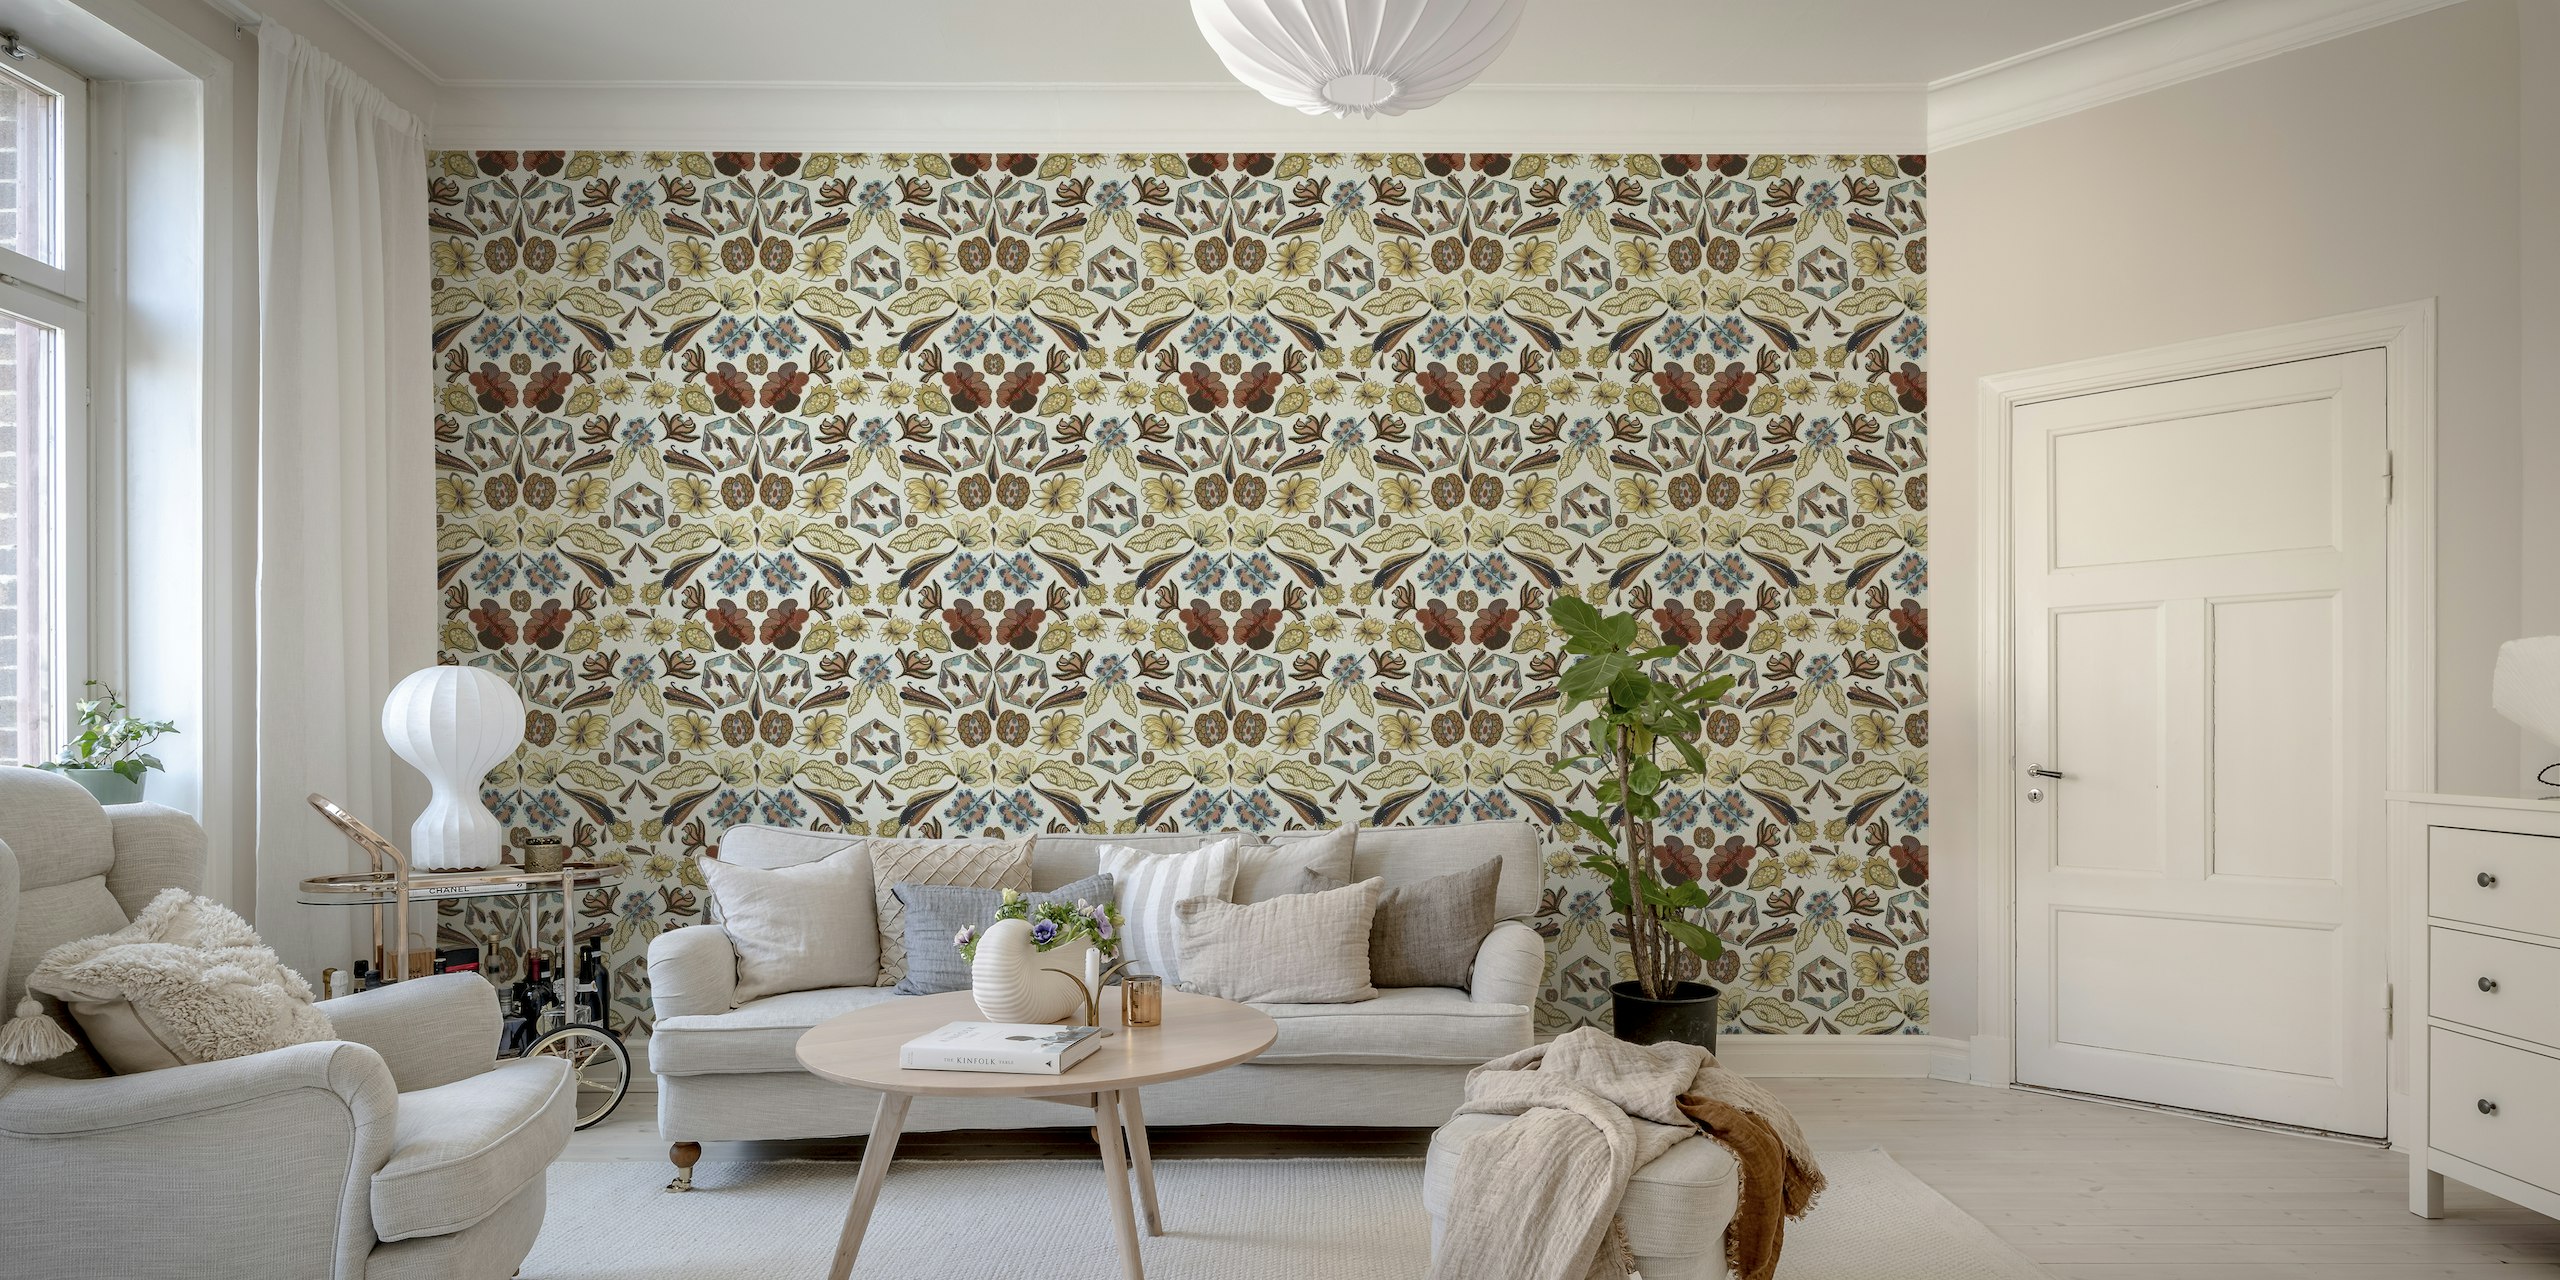 Bohemian chic 'Hippy Folk Pattern' wall mural with floral and abstract motifs in earthy tones.